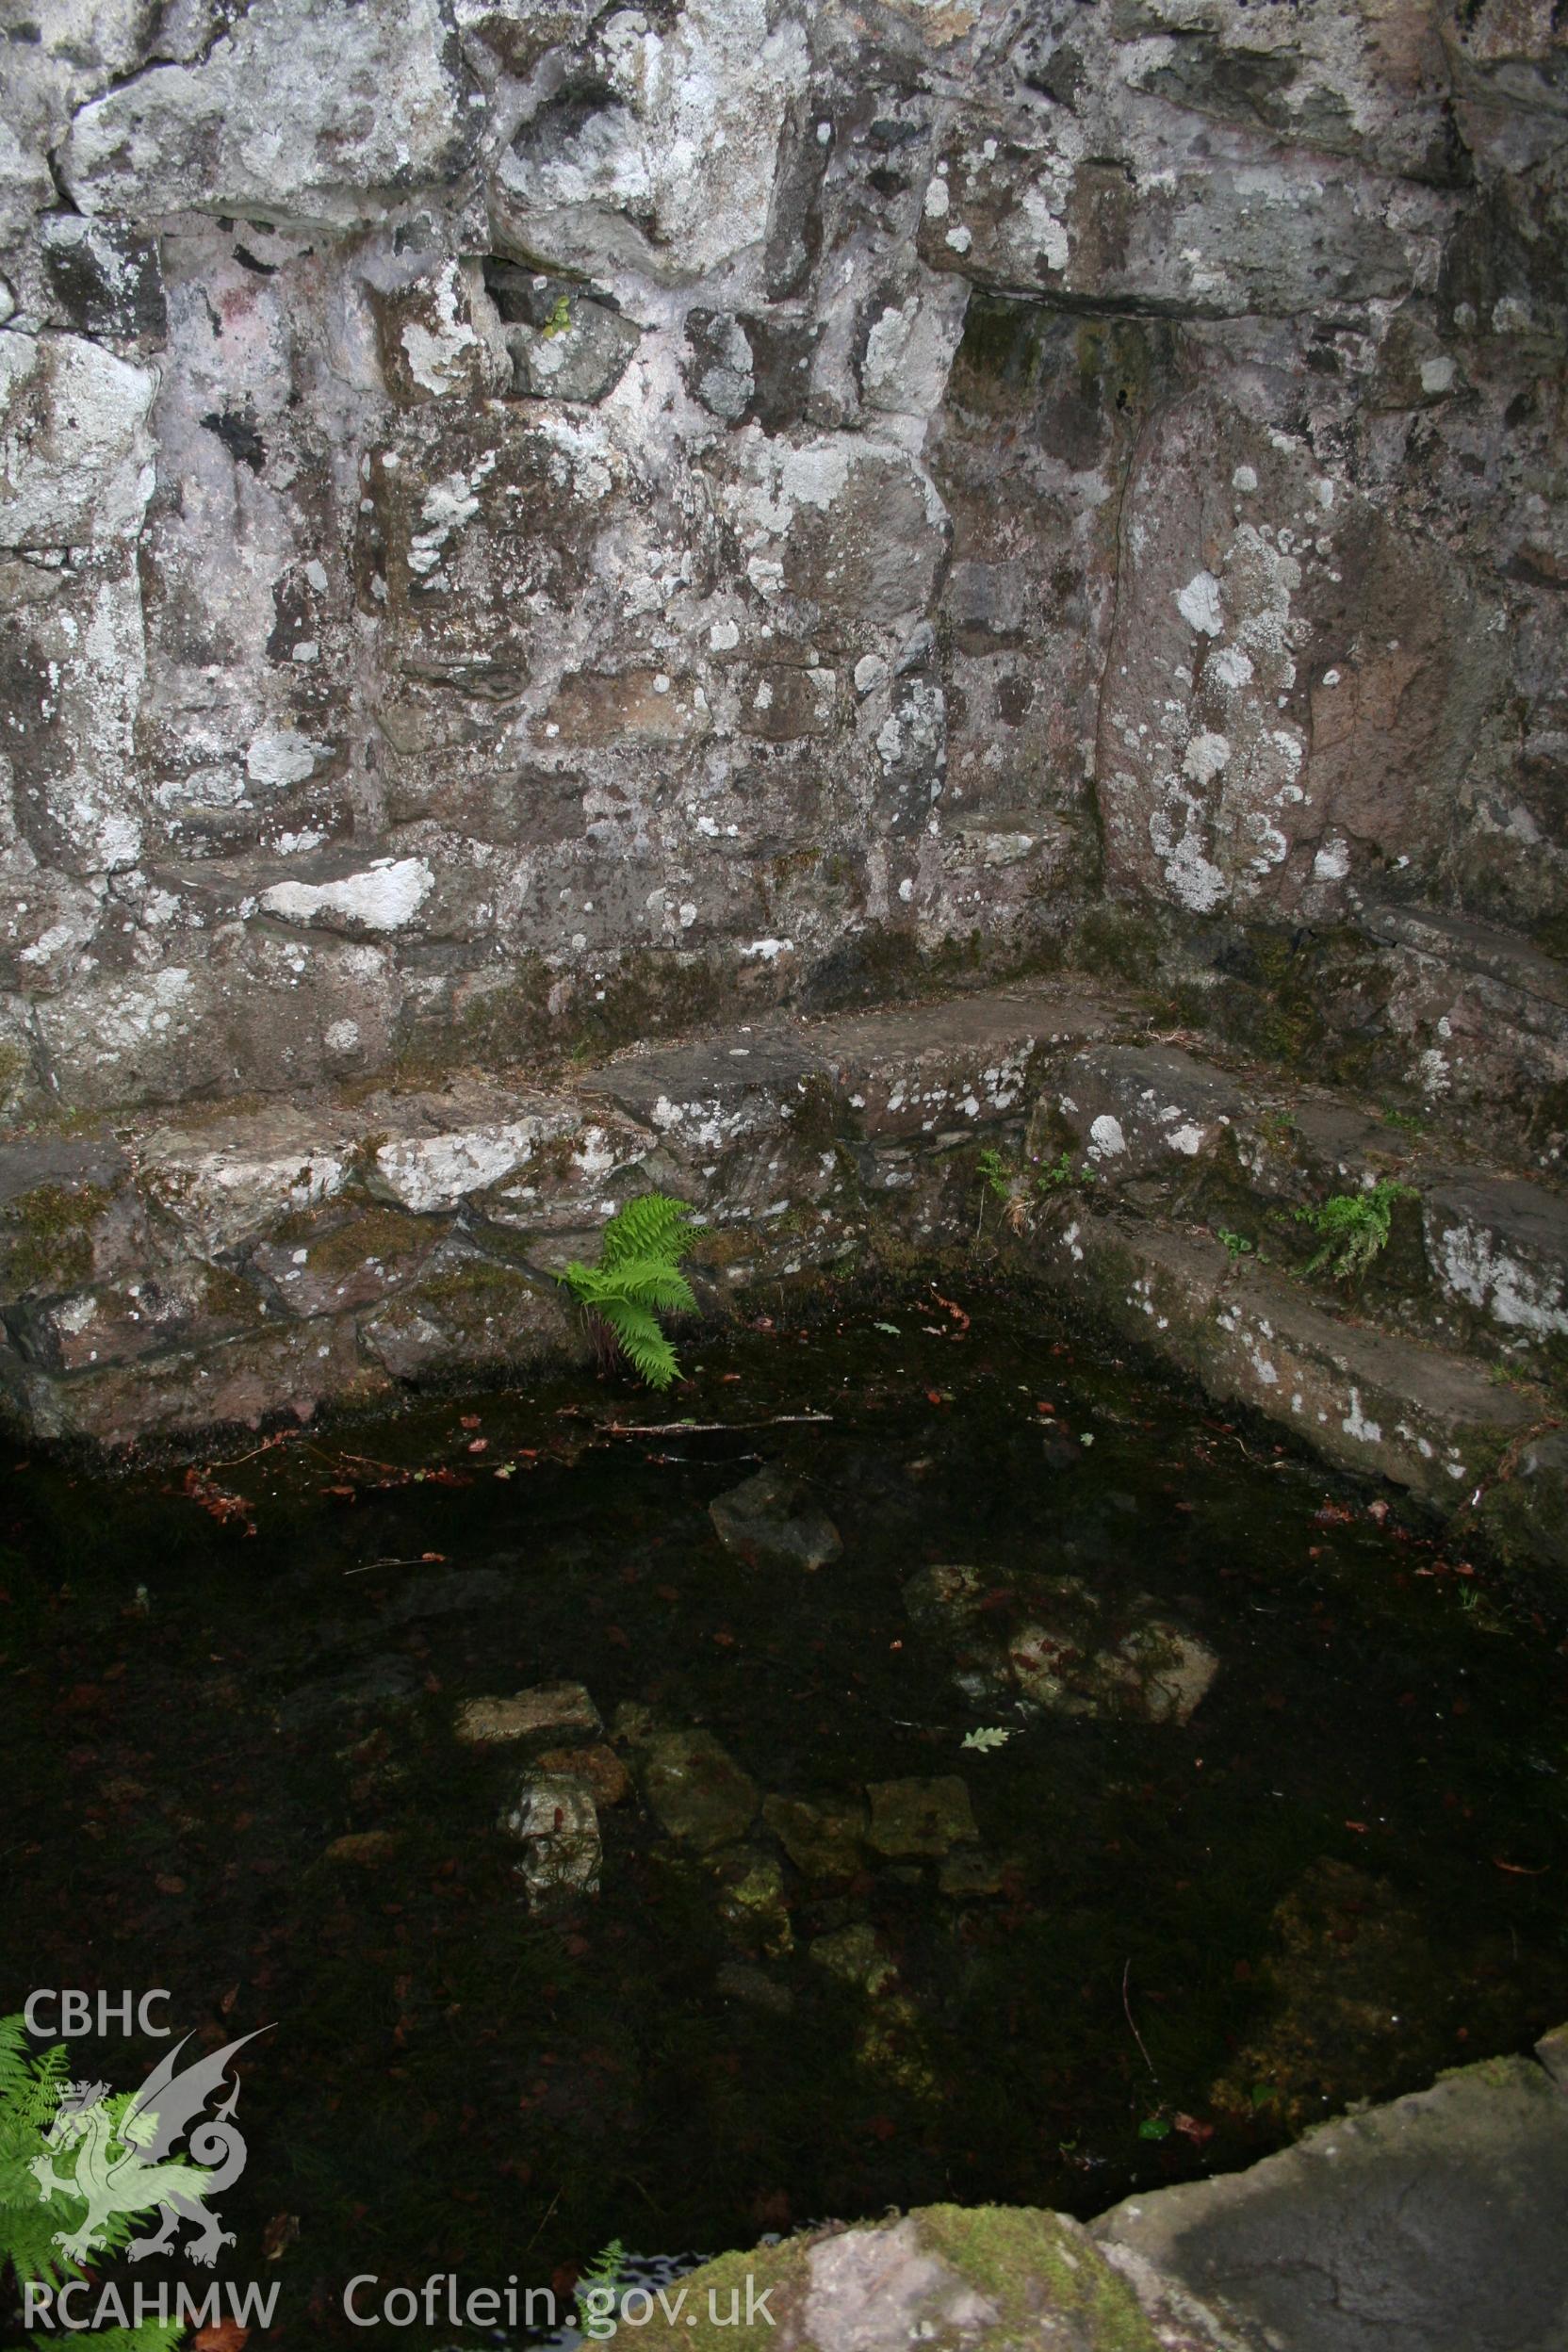 Interior of well chamber with sunken tank.